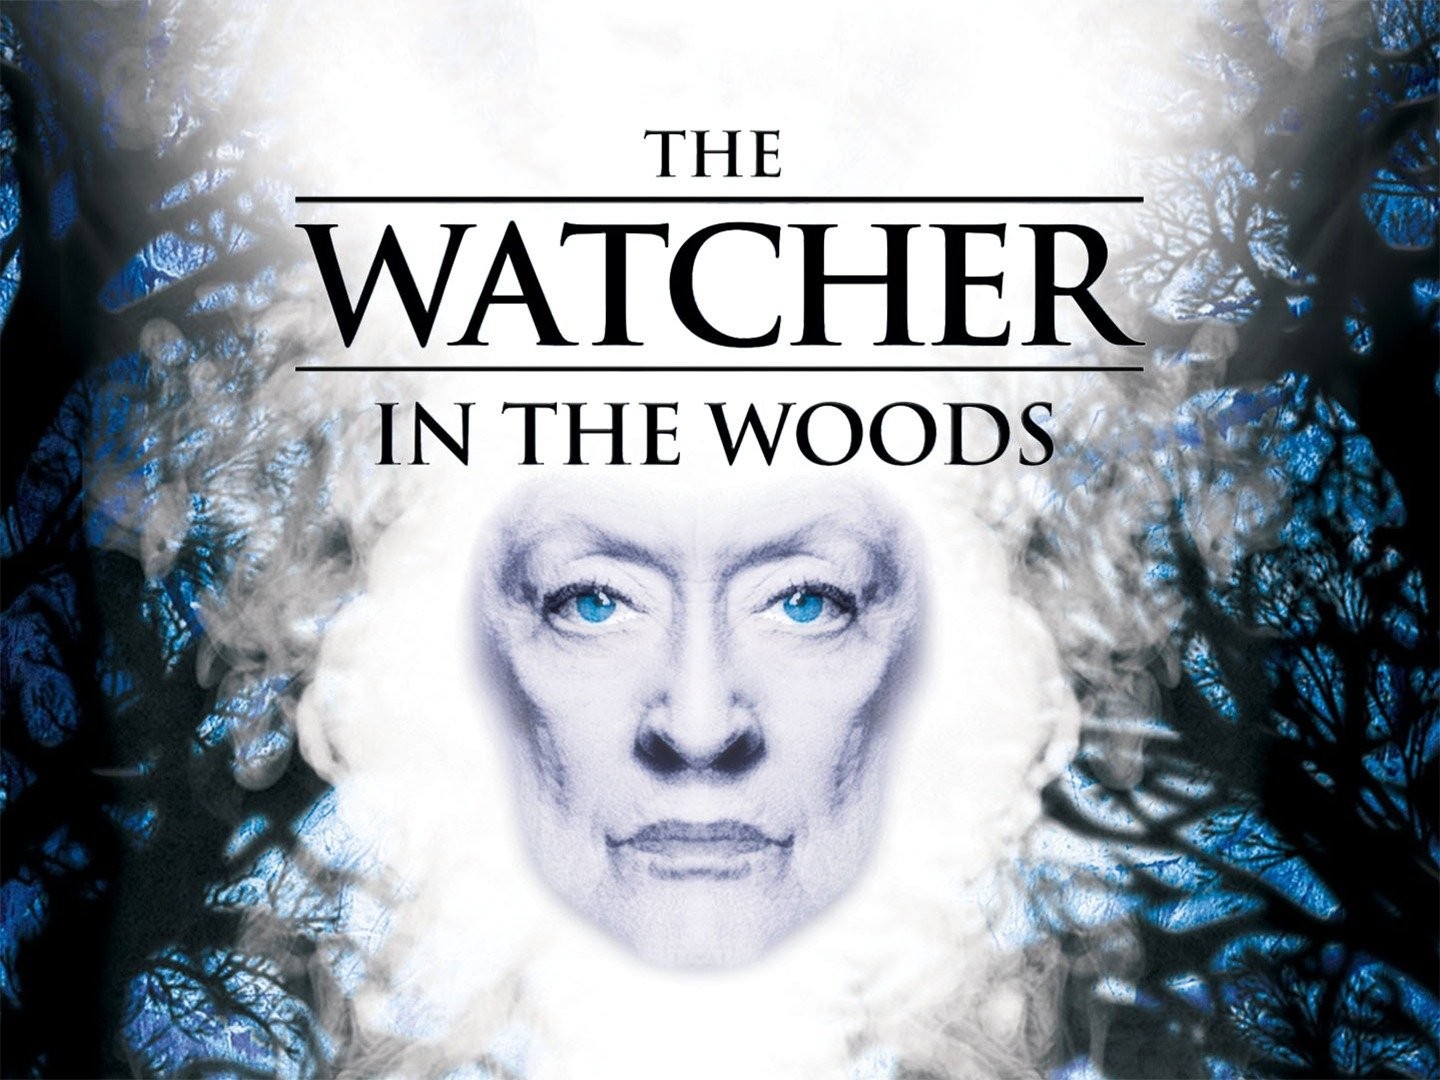 A Watcher in the Woods - Wikipedia